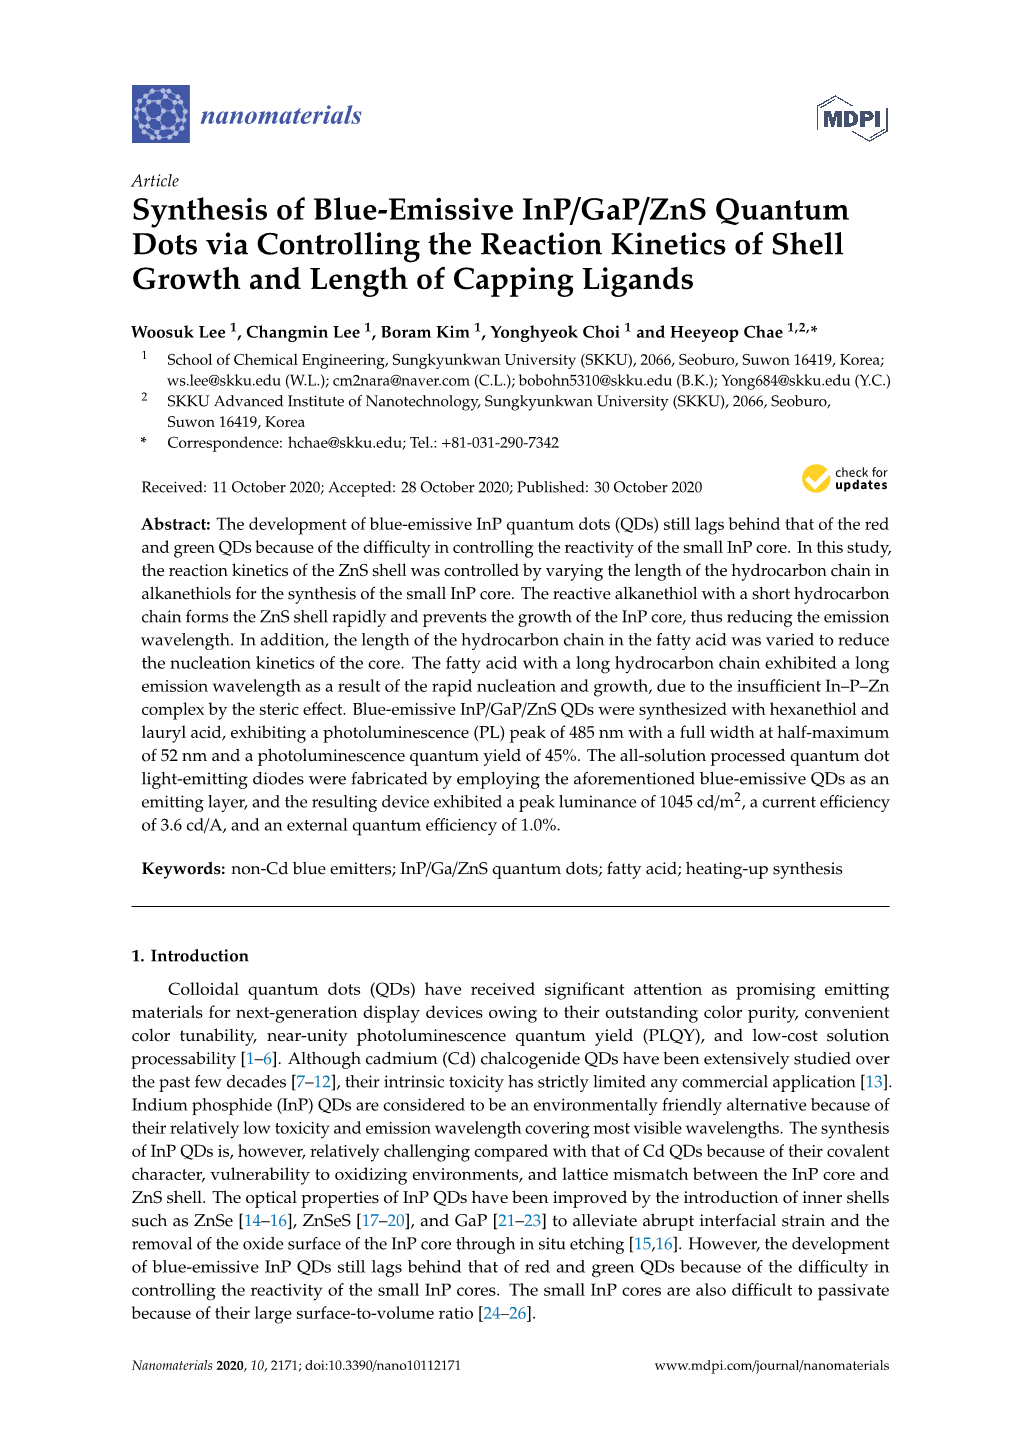 Synthesis of Blue-Emissive Inp/Gap/Zns Quantum Dots Via Controlling the Reaction Kinetics of Shell Growth and Length of Capping Ligands